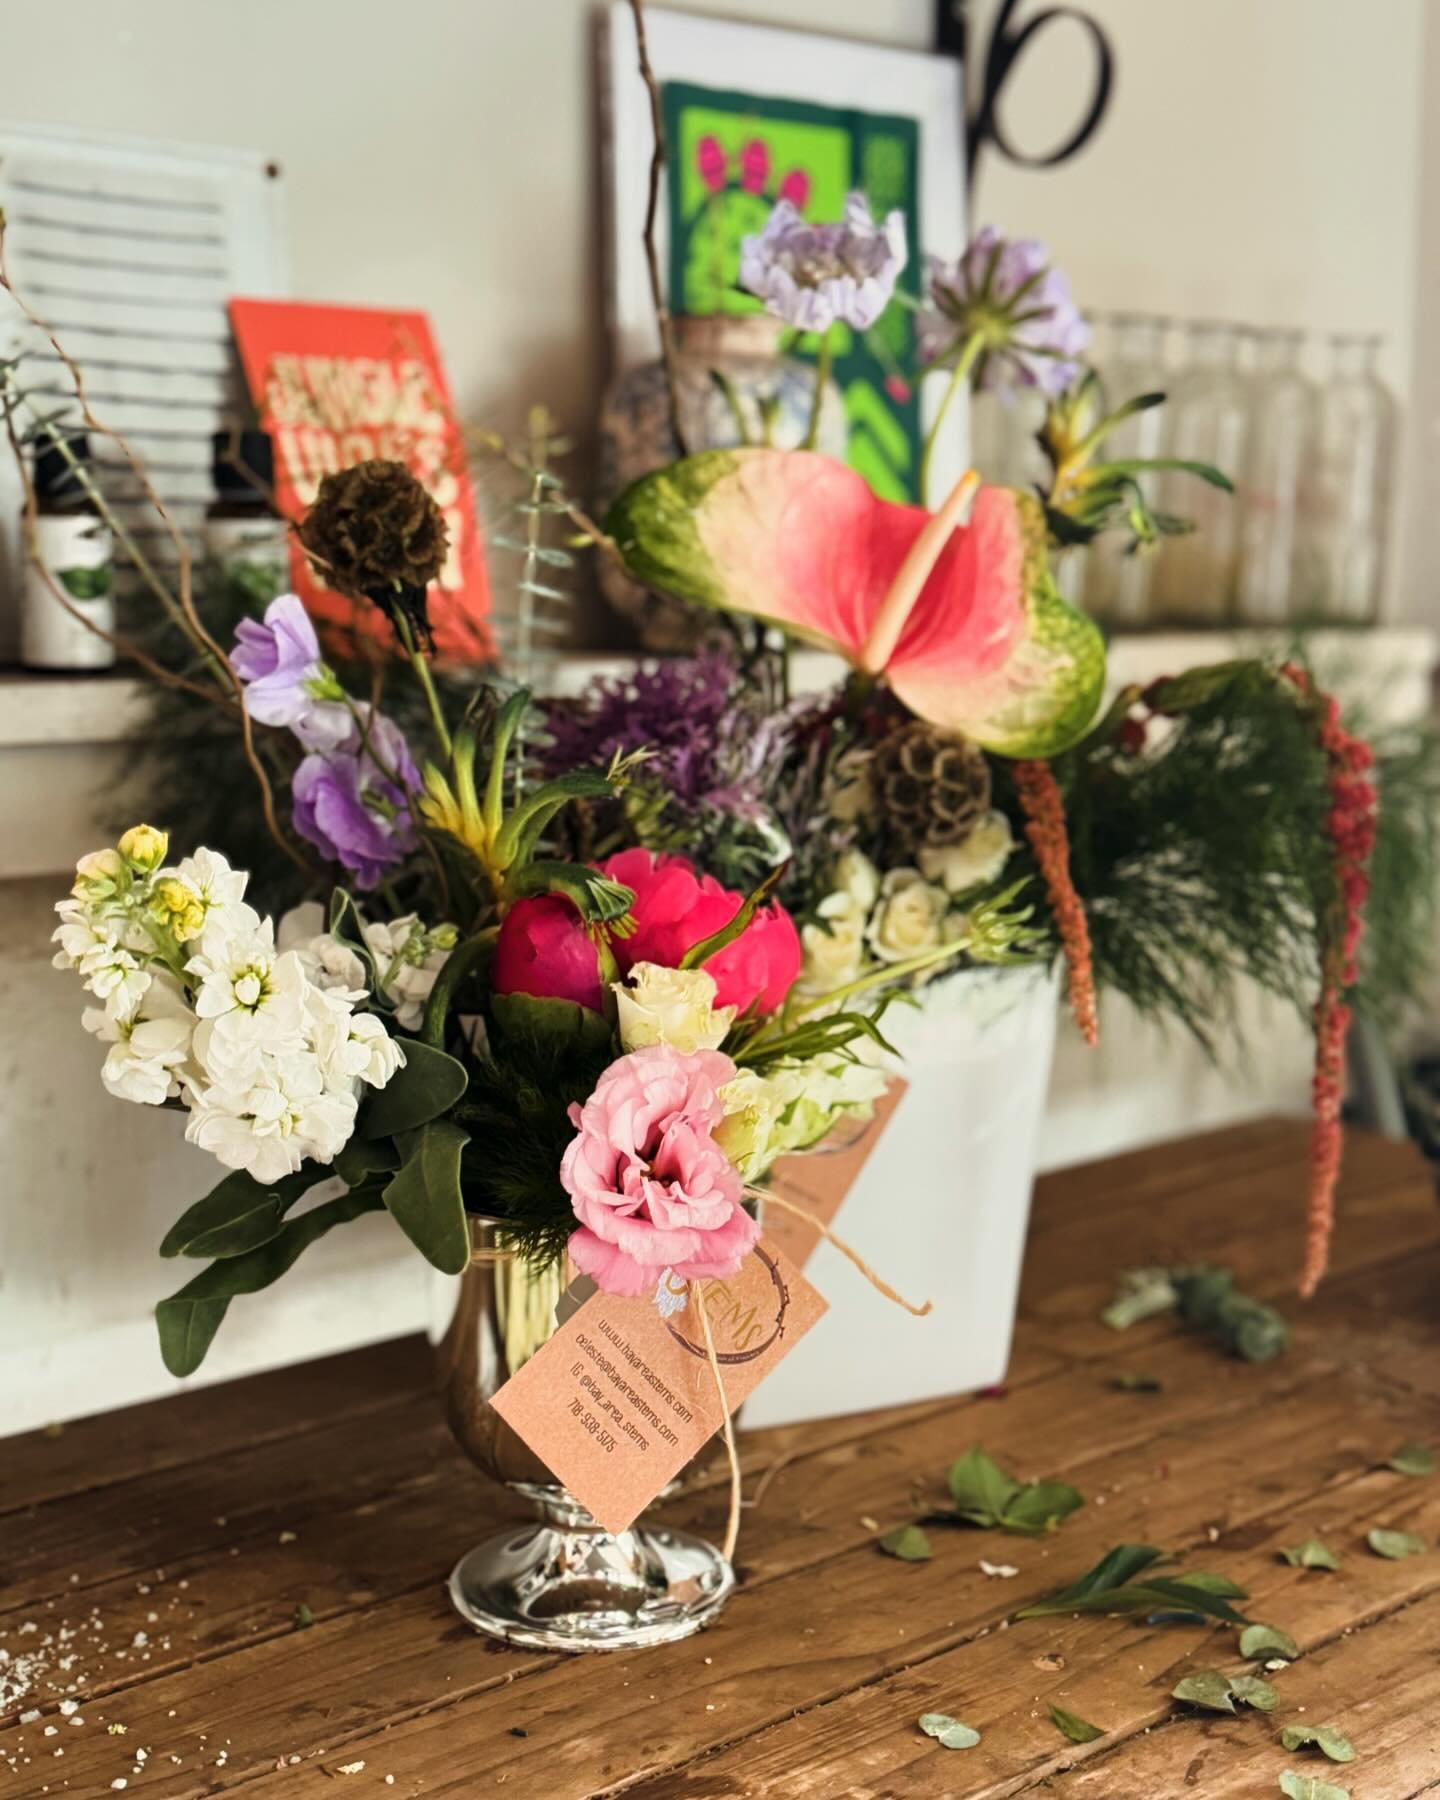 Rainy day 💕. These lovers were adorably texting me simultaneously, ordering arrangements for one another🥰. Happy Anniversary!
.
.
#STEMS #nicestems #anniversary #love #floraldesign #celebrate #love #floralarrangement #rainyday #oaklandbusiness #sho